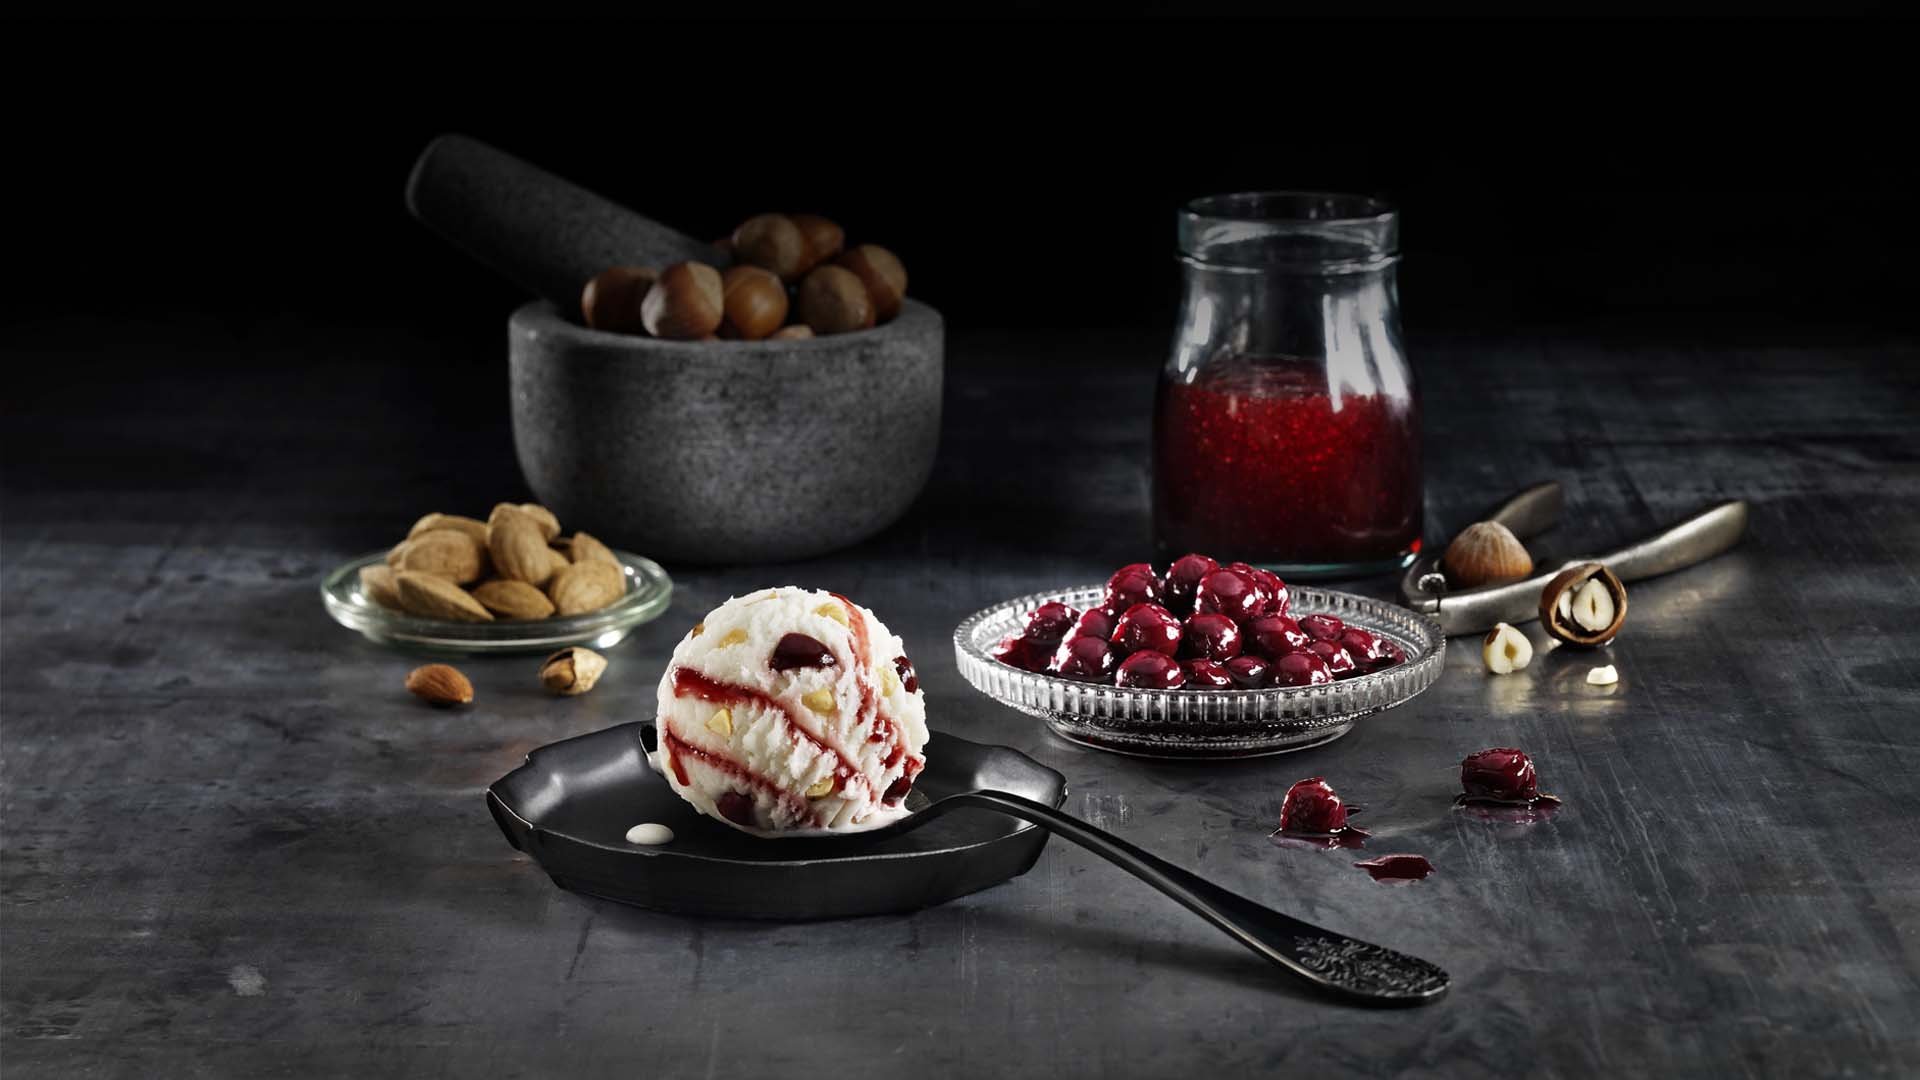 Food styling for the Scandal Vanilla parfait flavour with cherry spoon sweet, fresh cherries, walnuts, almonds and a scoop of ice cream